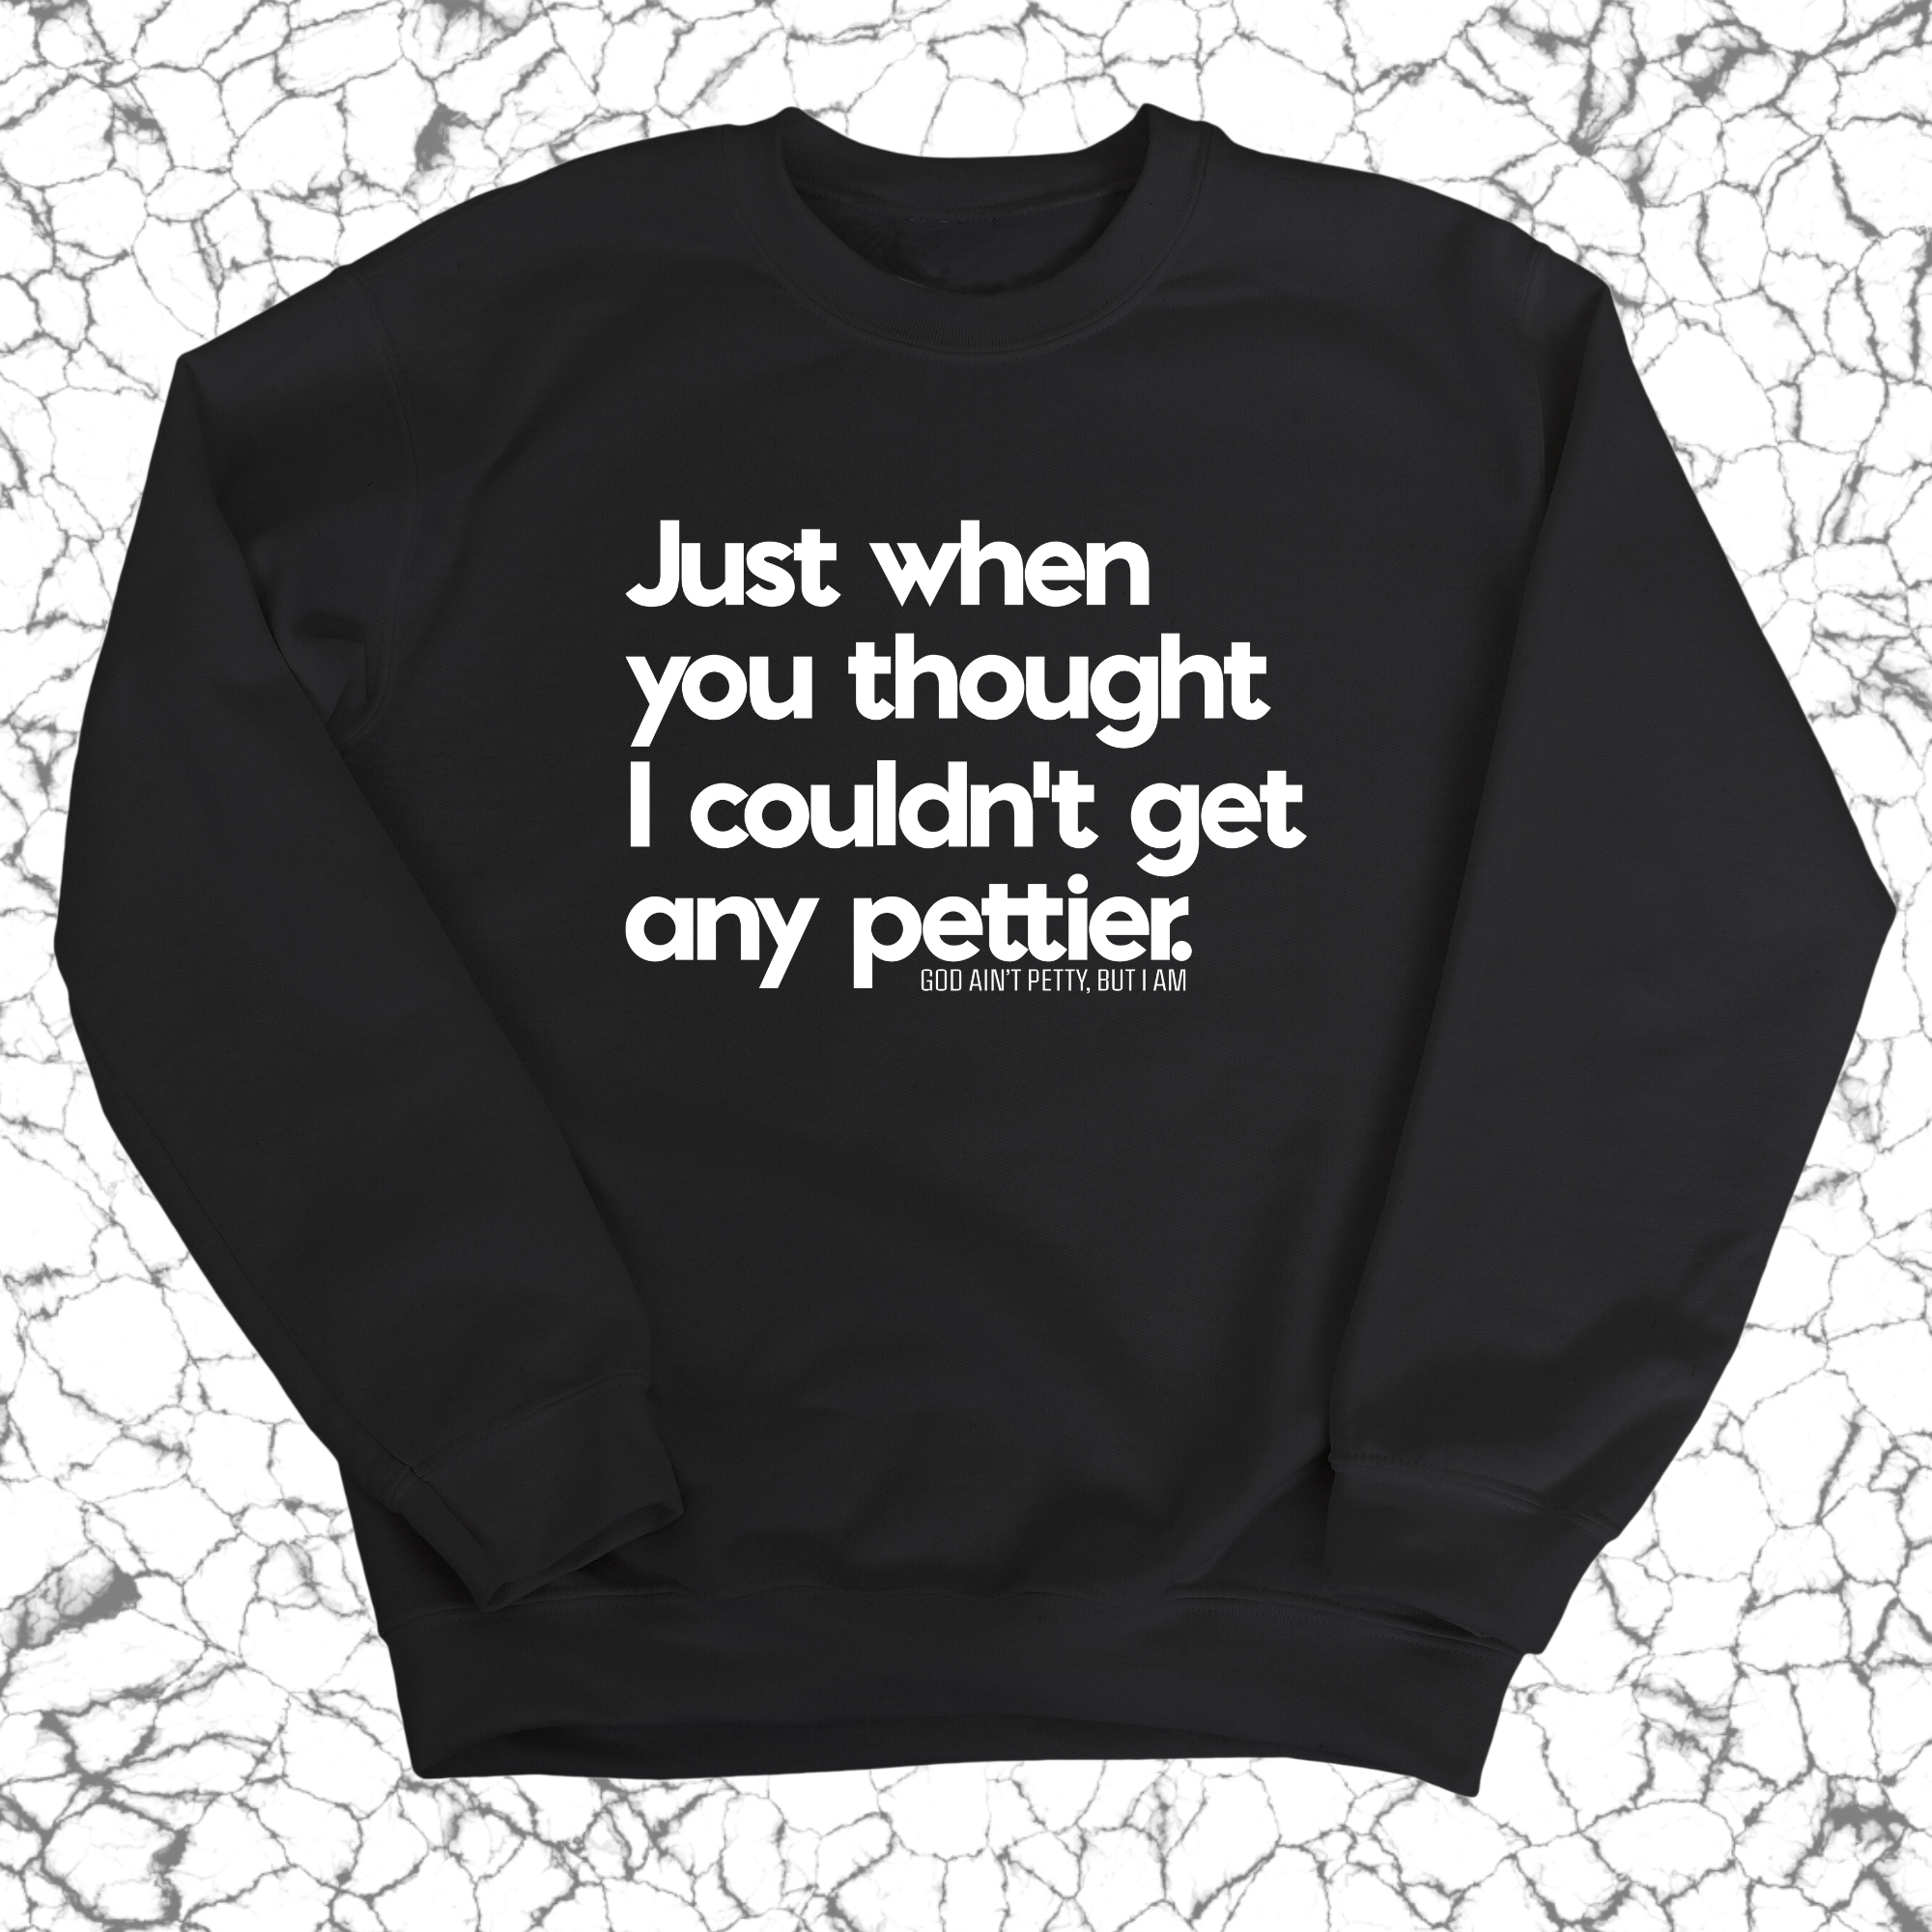 Just when you thought I couldn't get any pettier Unisex Sweatshirt-Sweatshirt-The Original God Ain't Petty But I Am